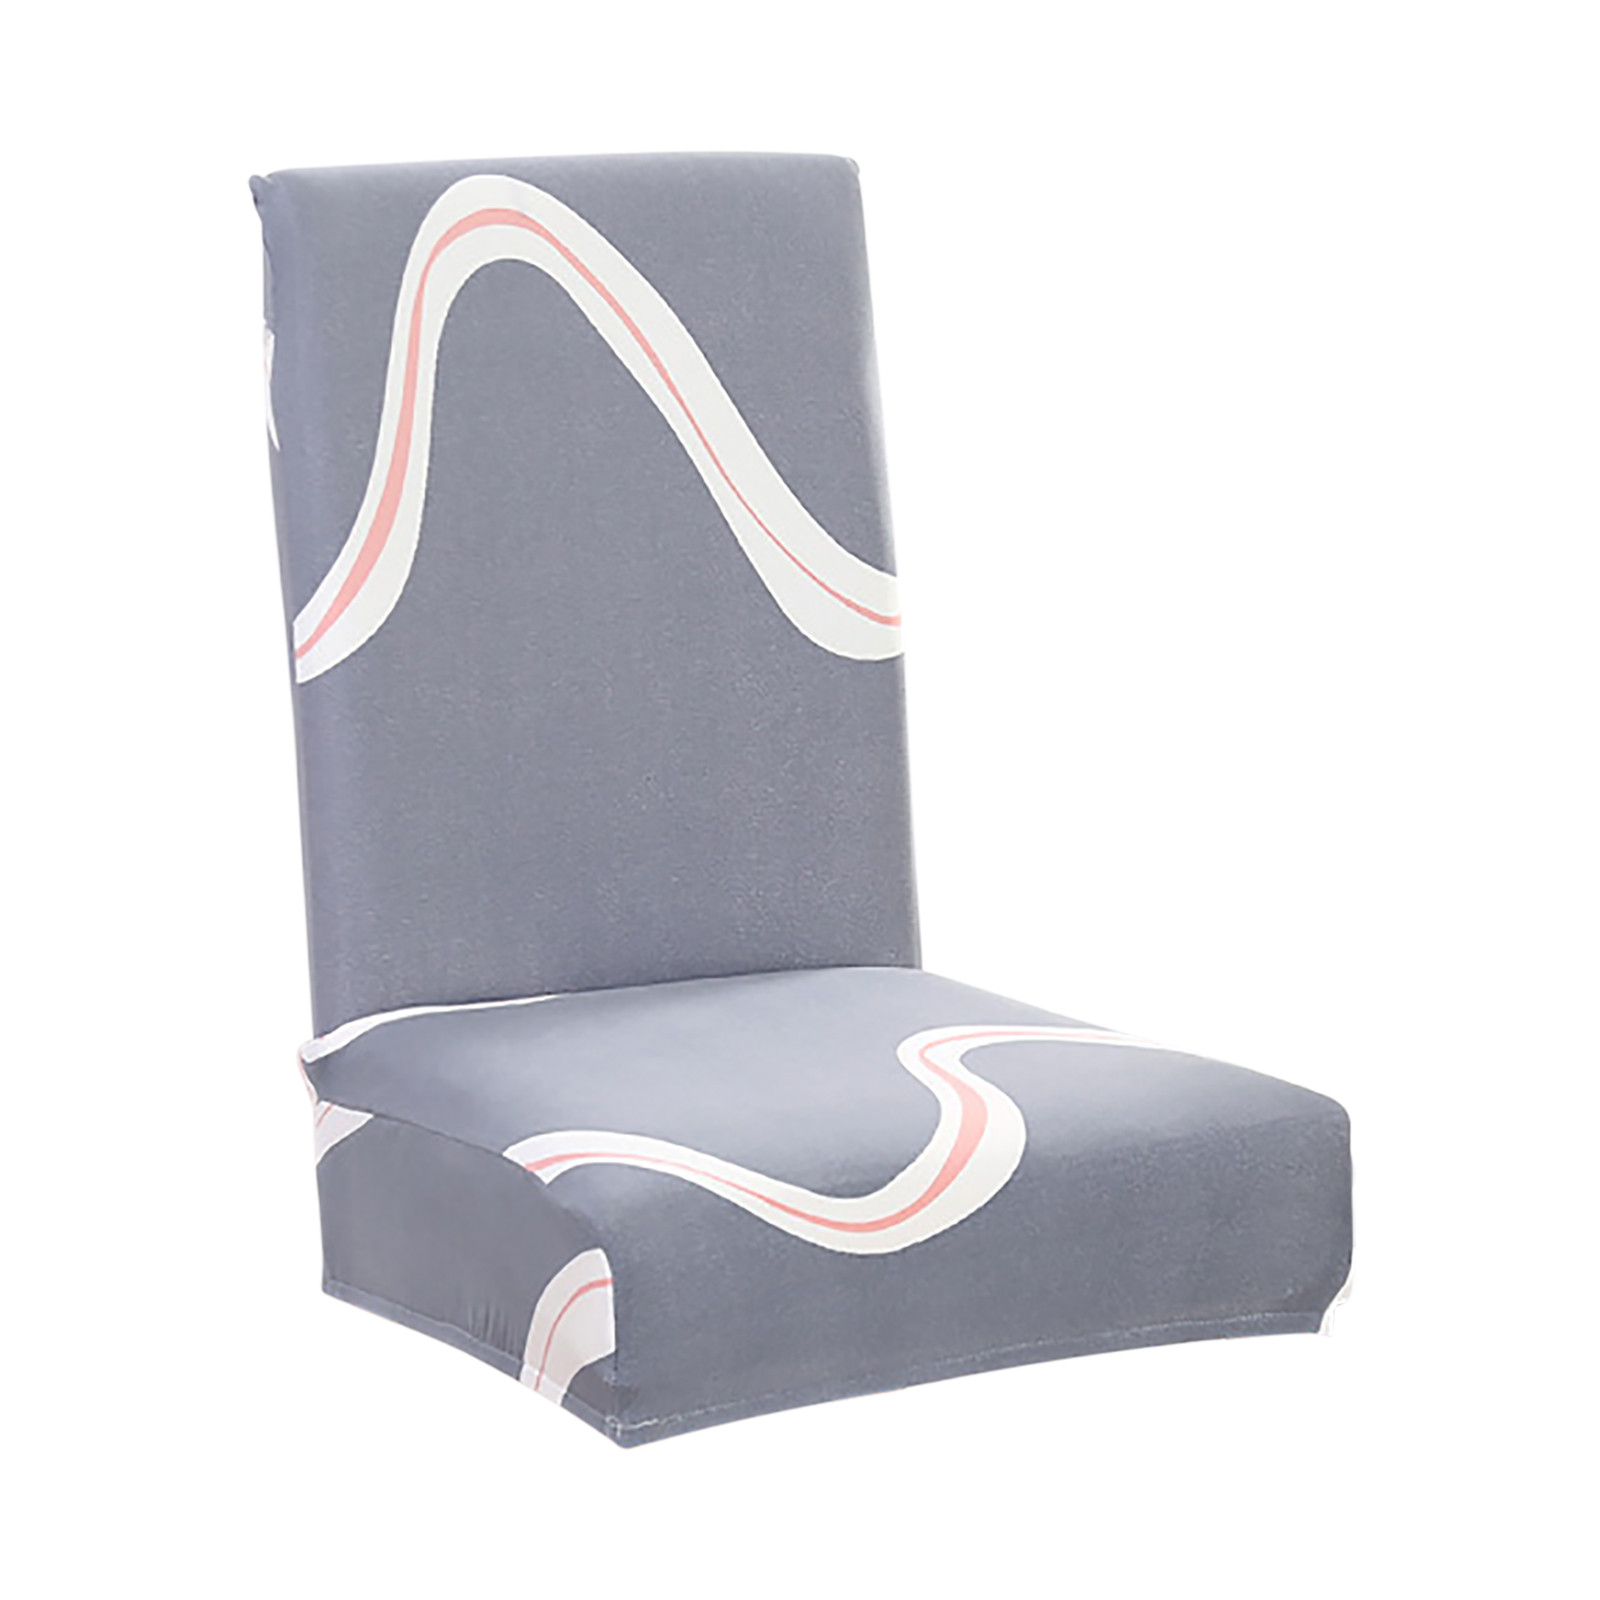 Dtydtpe Chair Cover Chair Cover Stretch Chair Package Chair Cover One-Piece Stretch Chair Cover - image 1 of 2